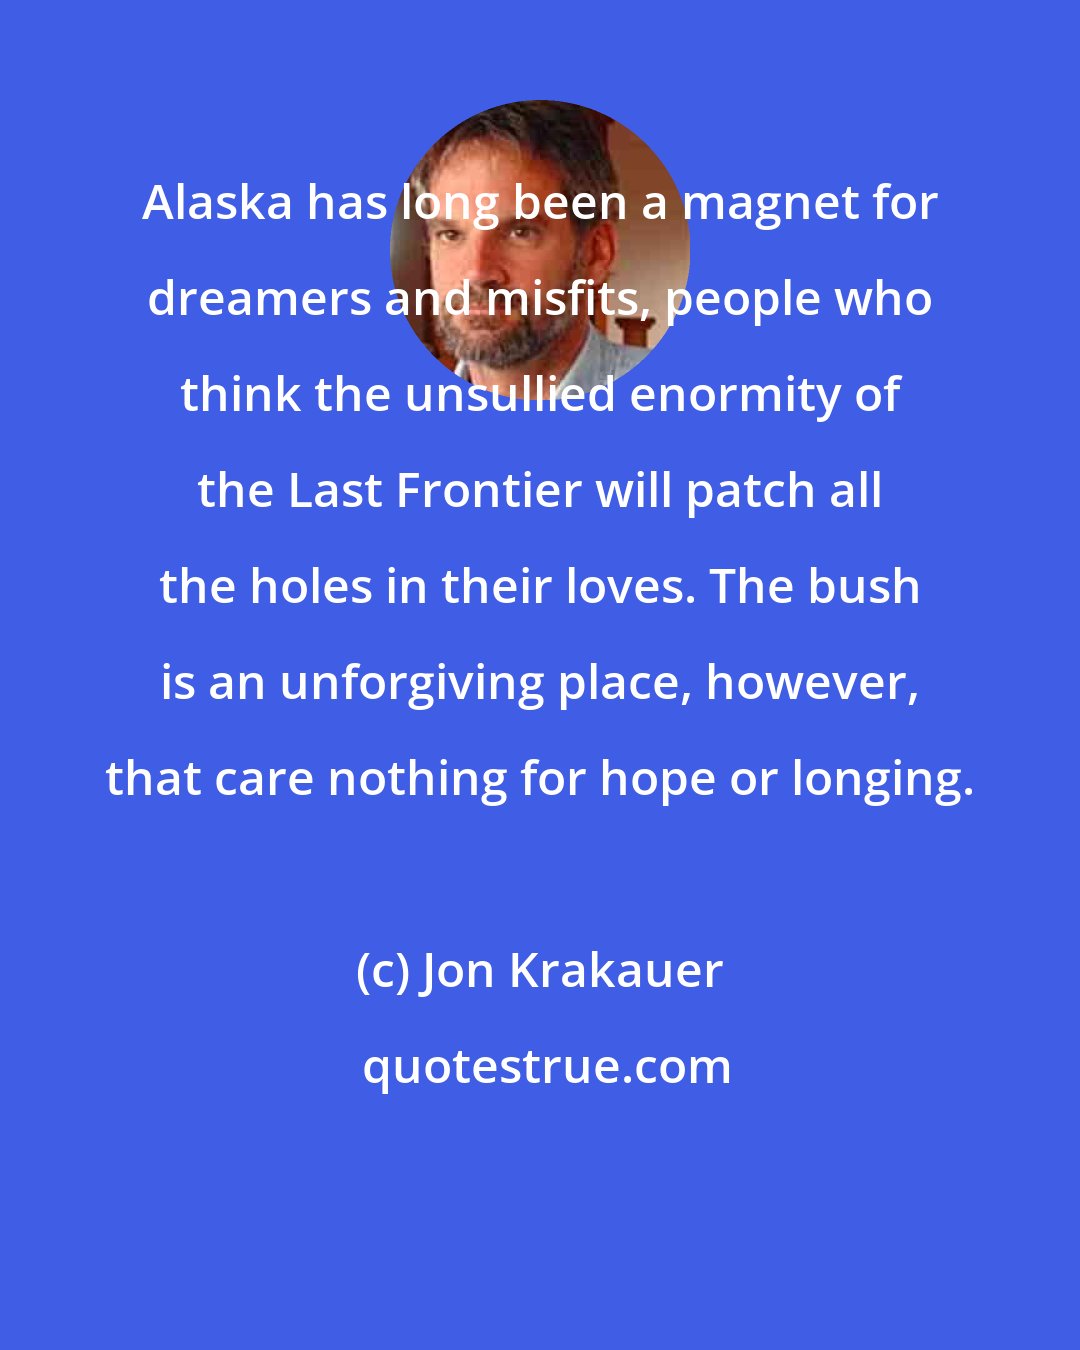 Jon Krakauer: Alaska has long been a magnet for dreamers and misfits, people who think the unsullied enormity of the Last Frontier will patch all the holes in their loves. The bush is an unforgiving place, however, that care nothing for hope or longing.